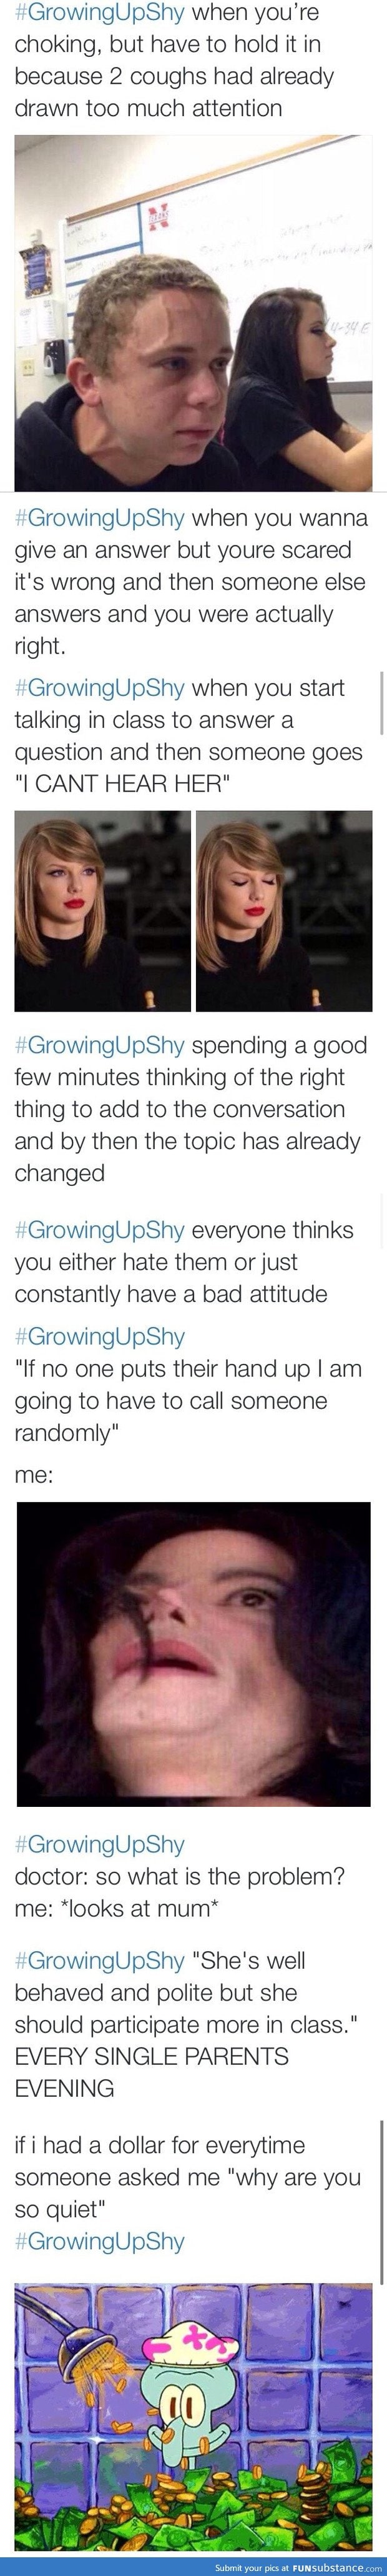 The problems shy people face when growing up